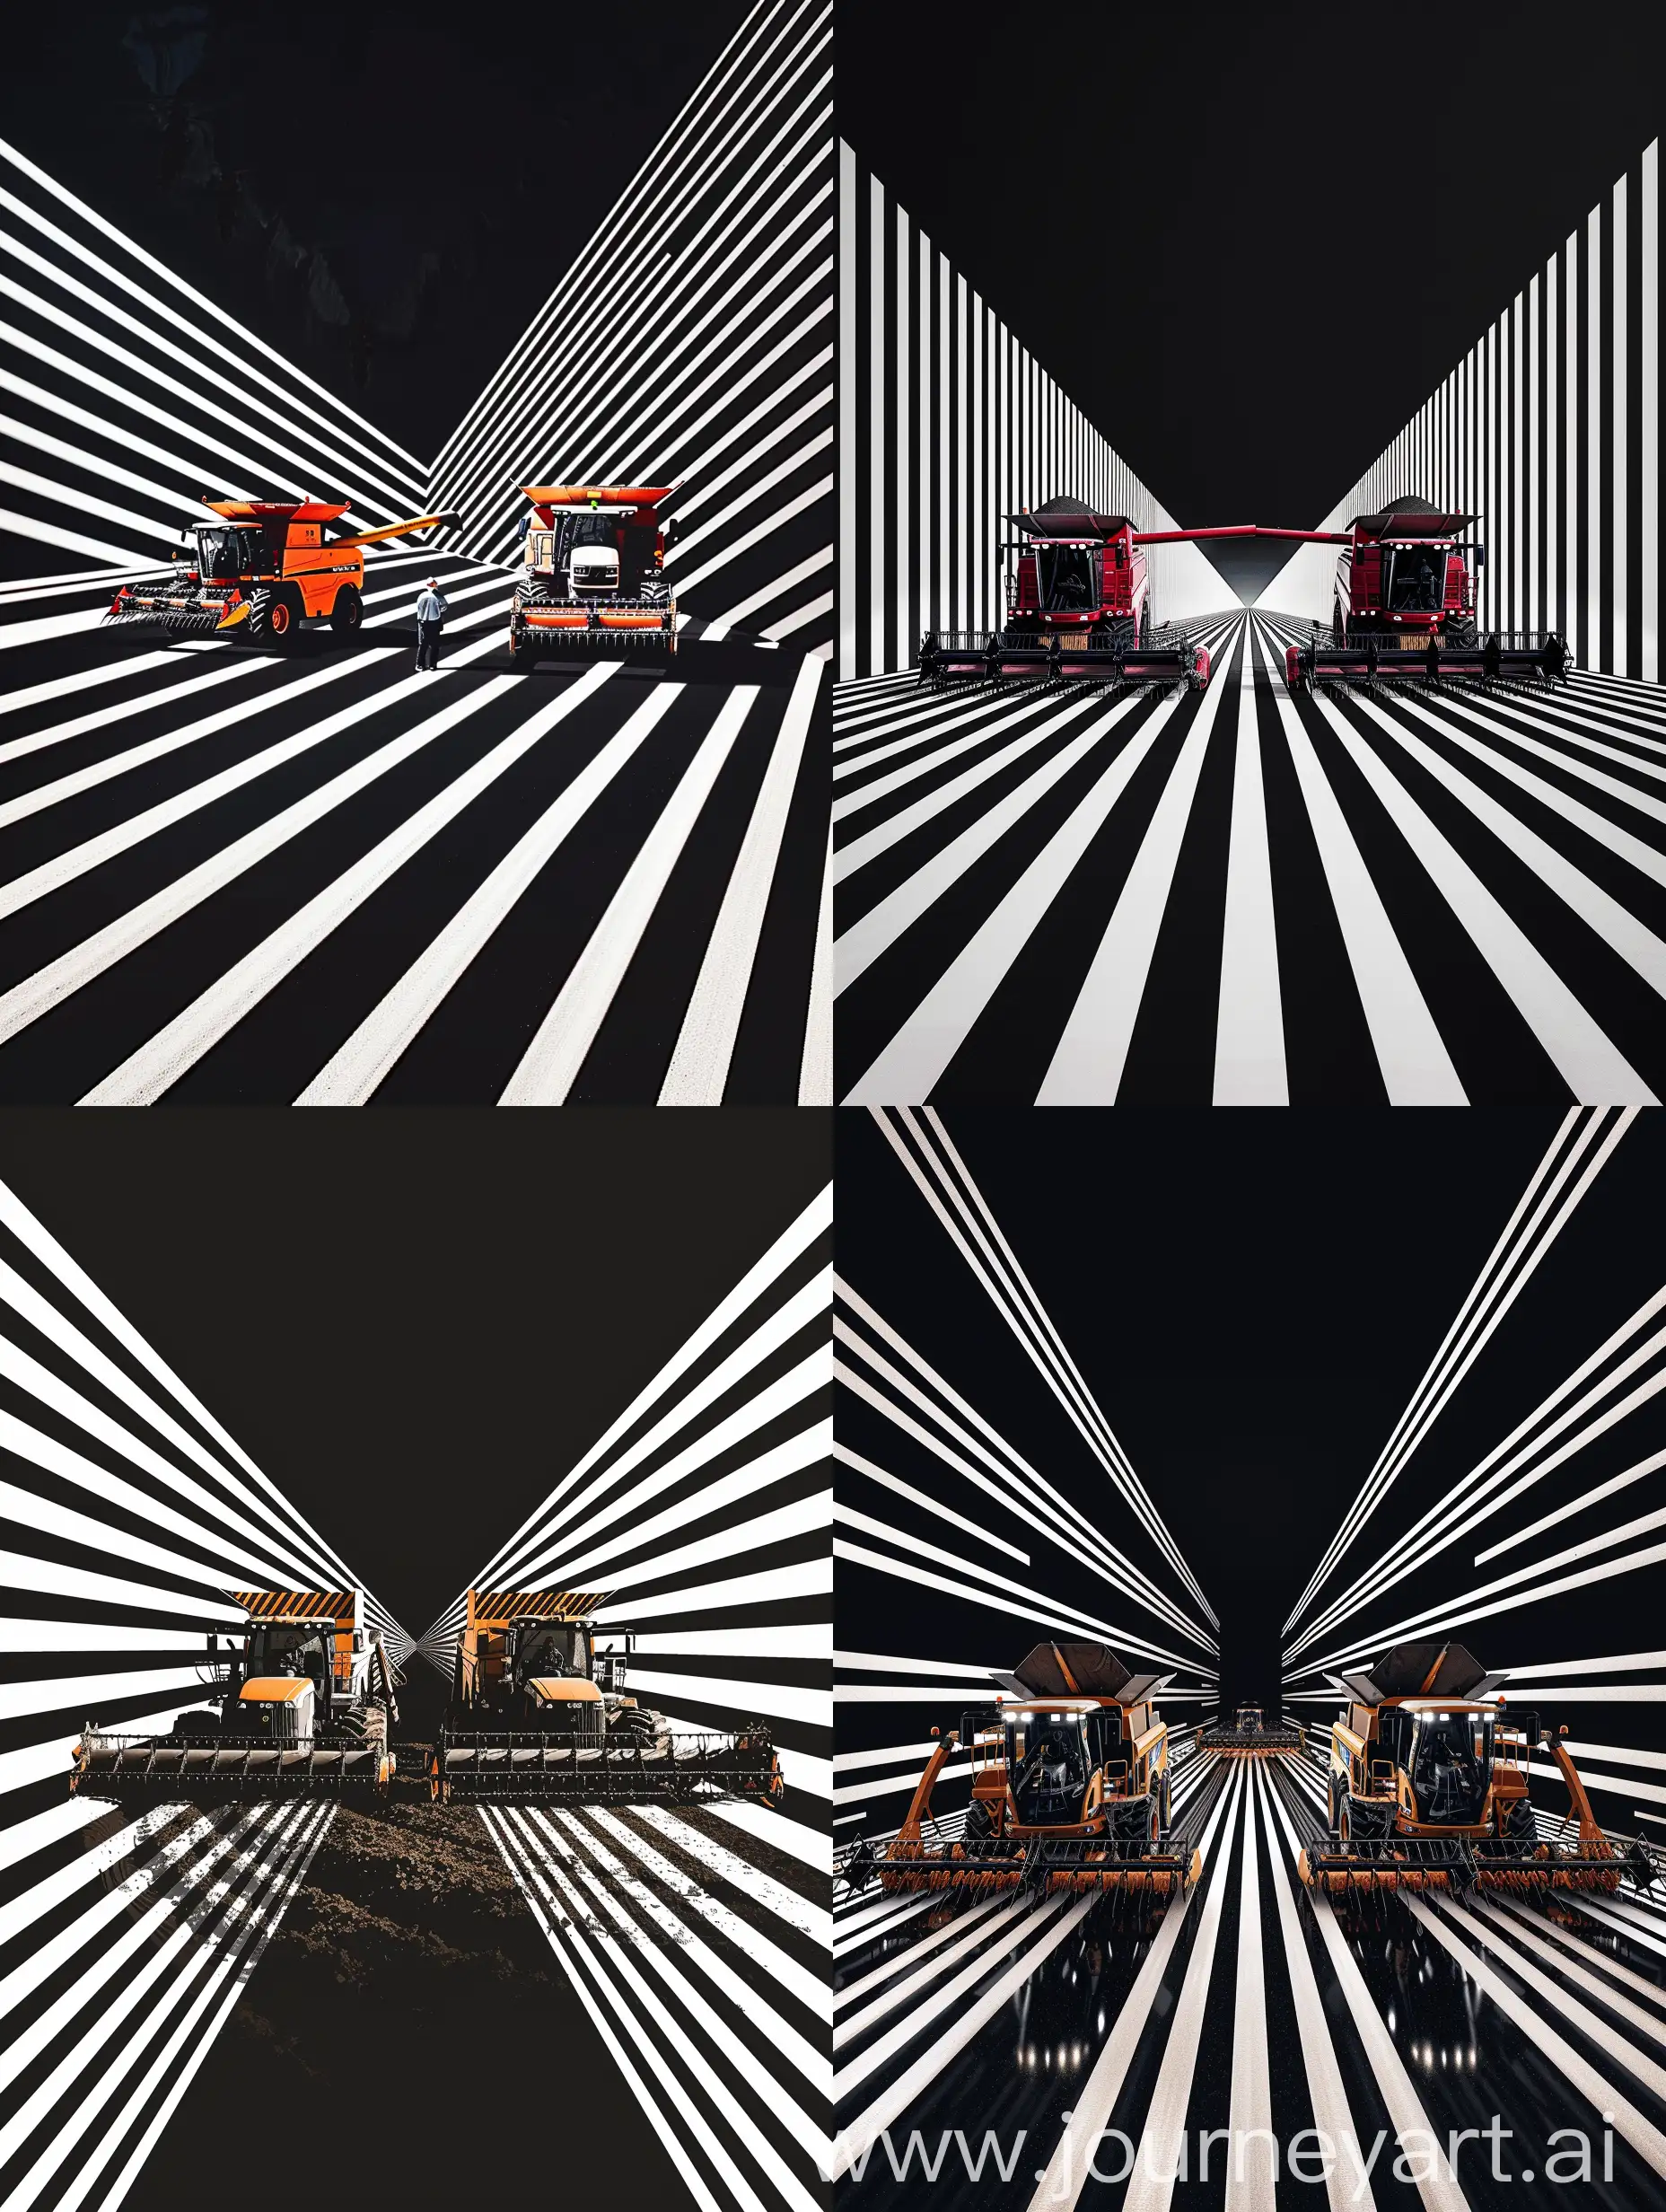 Create an impressive and powerful 4K quality image showing two harvesters standing in the foreground flanked by white vector stripes on a black background, taken with a Nikon D850 camera. Add a volume and depth effect that emphasizes the scale and complexity of agricultural production